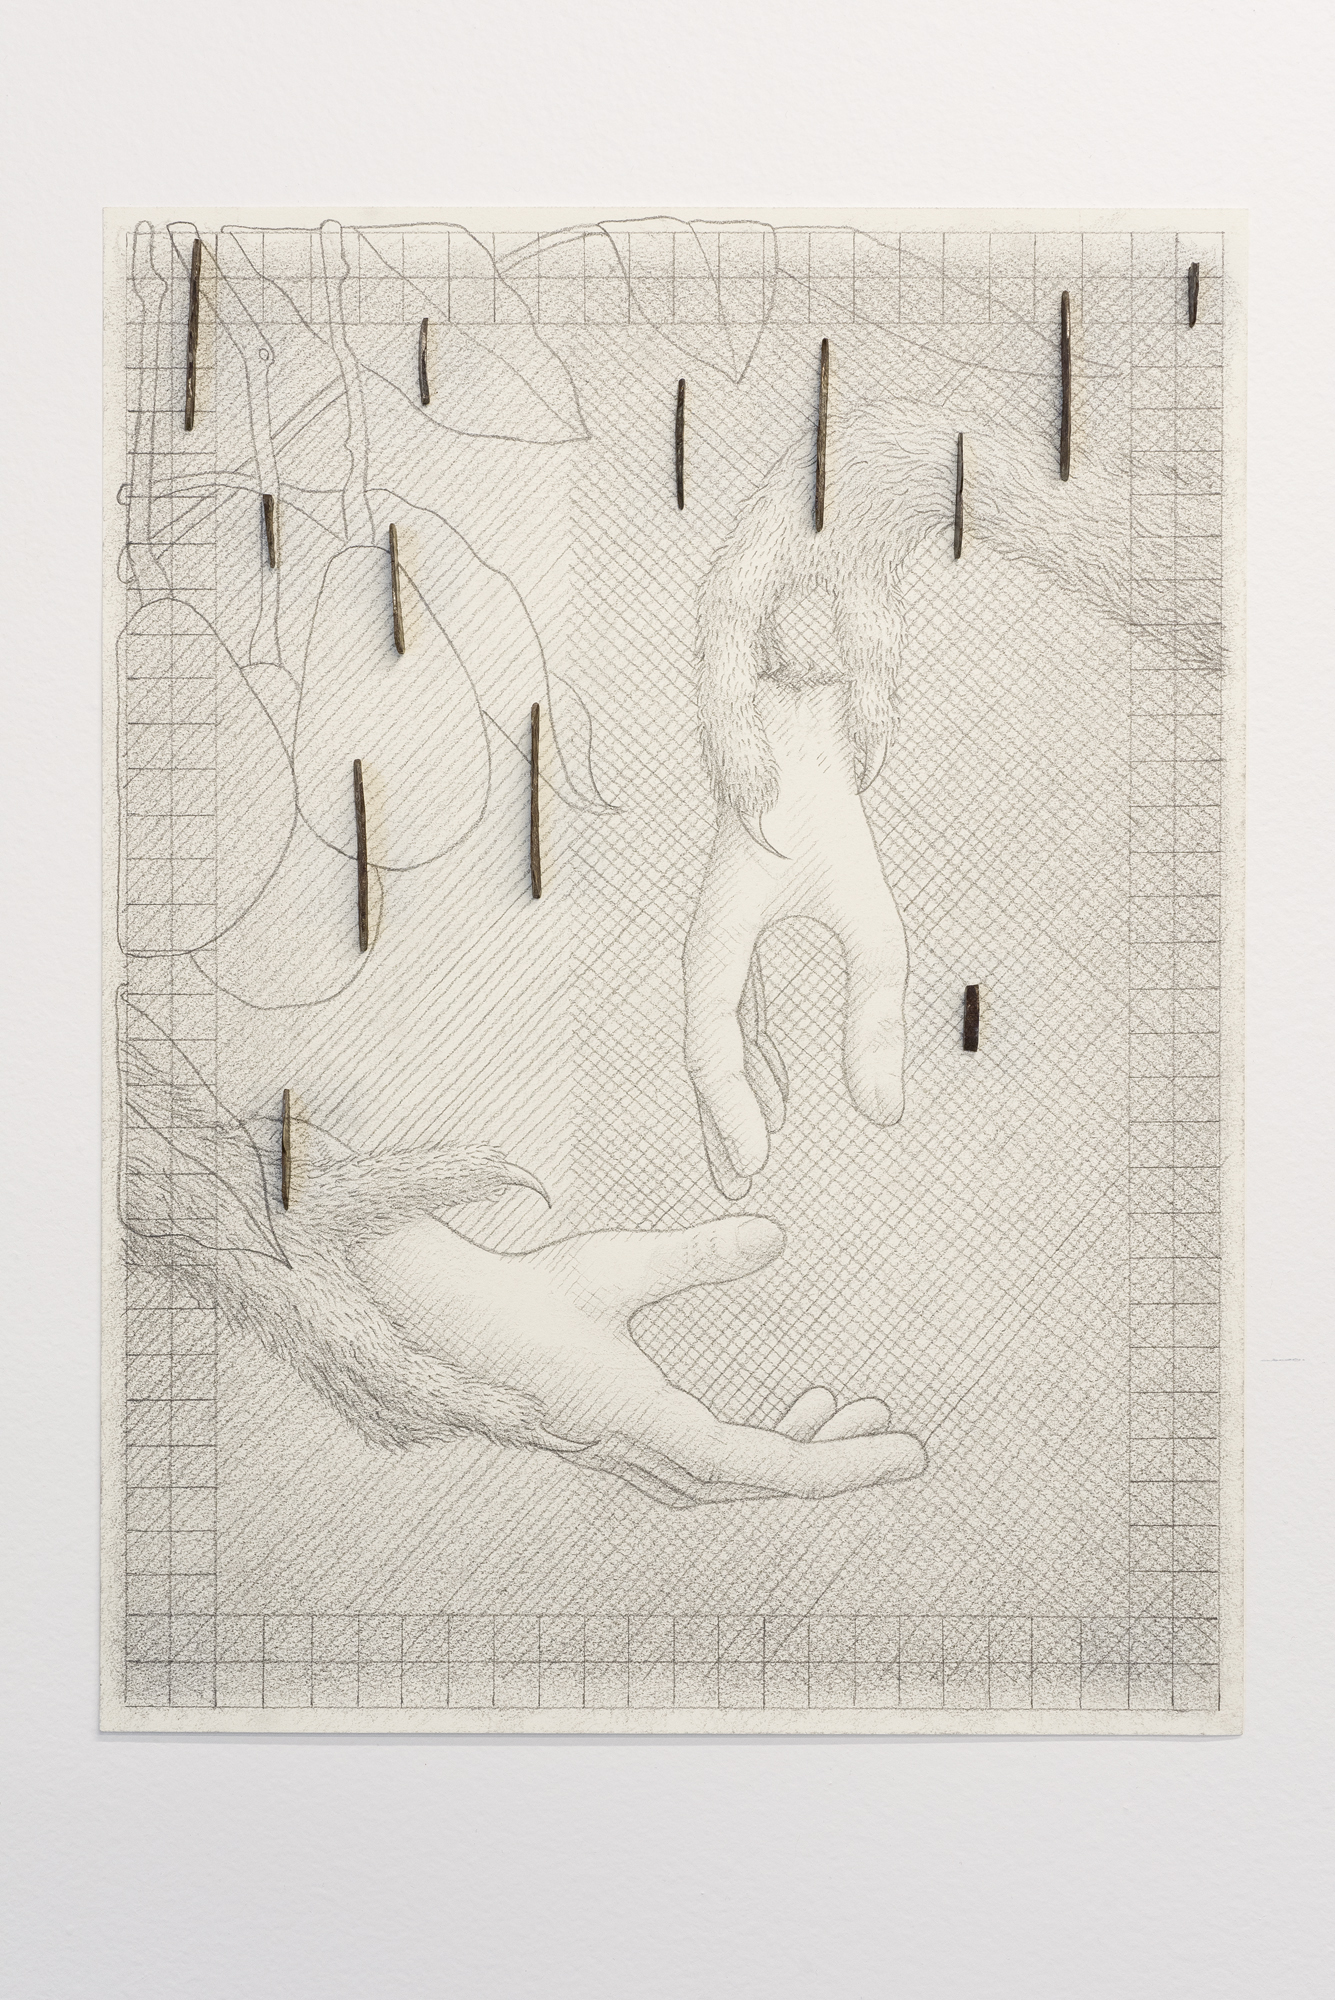  Jorge Satorre,  Sometimes I use images in my work that might be embarrassing to me, my family or my dealers,  2019. Pencil on paper, steel, magnets. Courtesy of the artist and Labor, Mexico; Photo: Preston/Kalogiros; Courtesy of The 500 Capp Street 